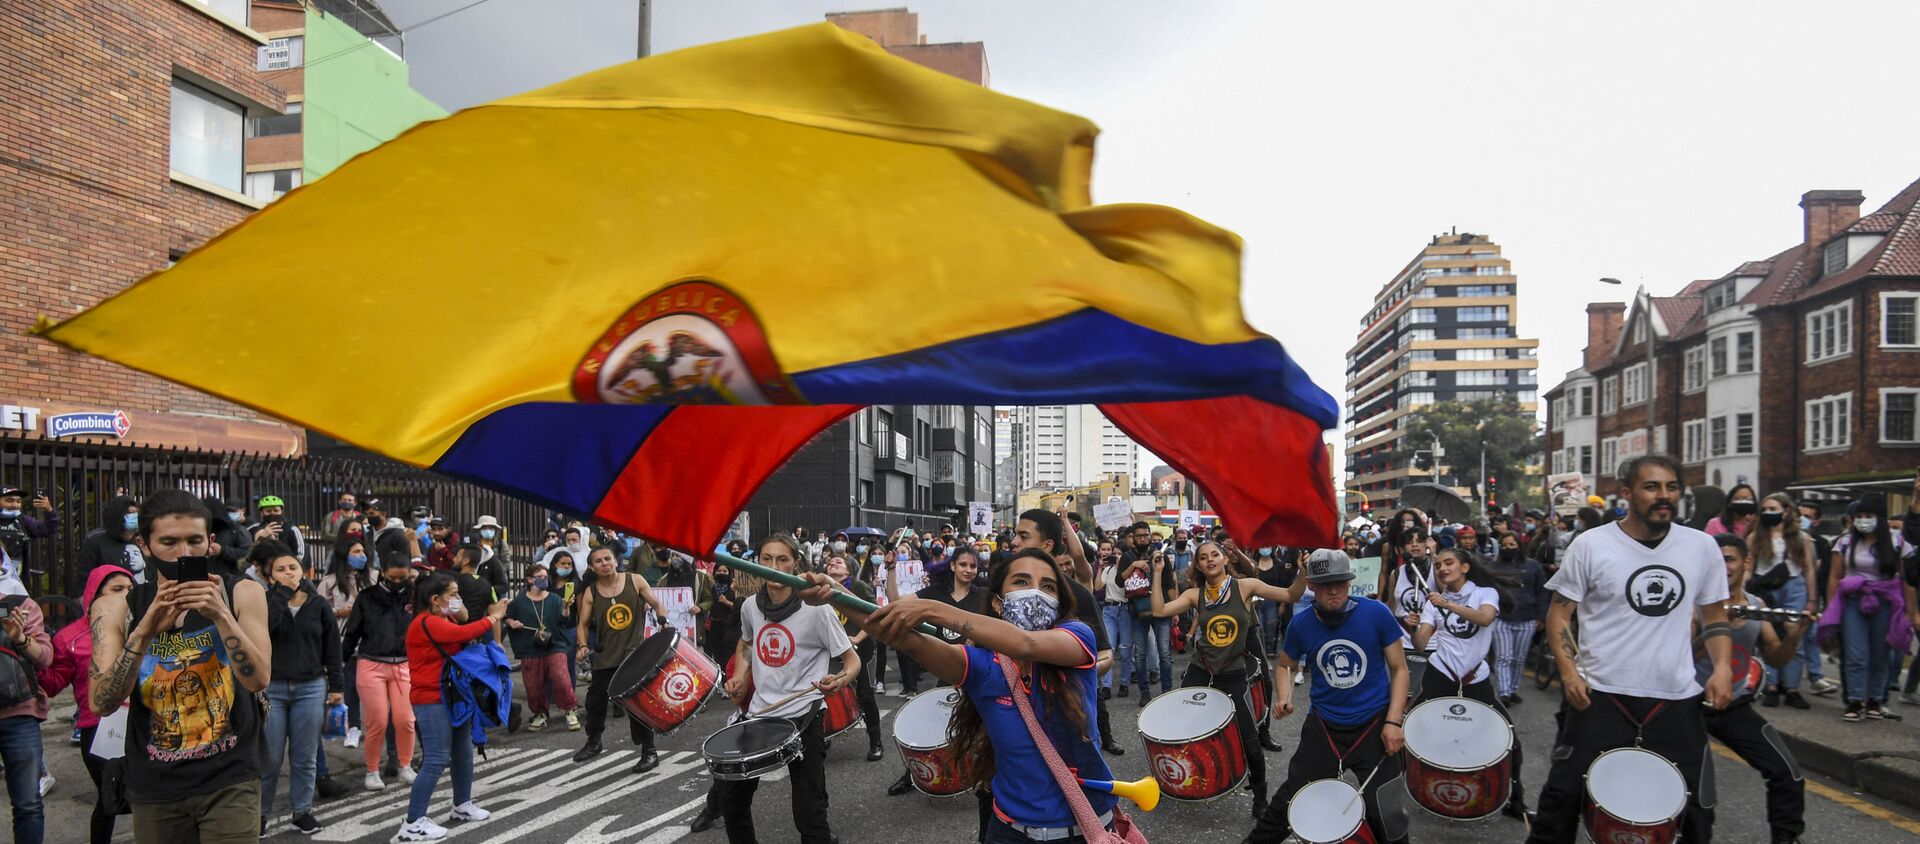 A woman waves a Colombian national flag during a protest against a tax reform proposed by Colombian President Ivan Duque's government in Bogota, on 4 May 2021. The international community on Tuesday decried what the UN described as an excessive use of force by security officers in Colombia after official data showed 19 people killed and 846 injured during anti-government protests. - Sputnik International, 1920, 05.05.2021